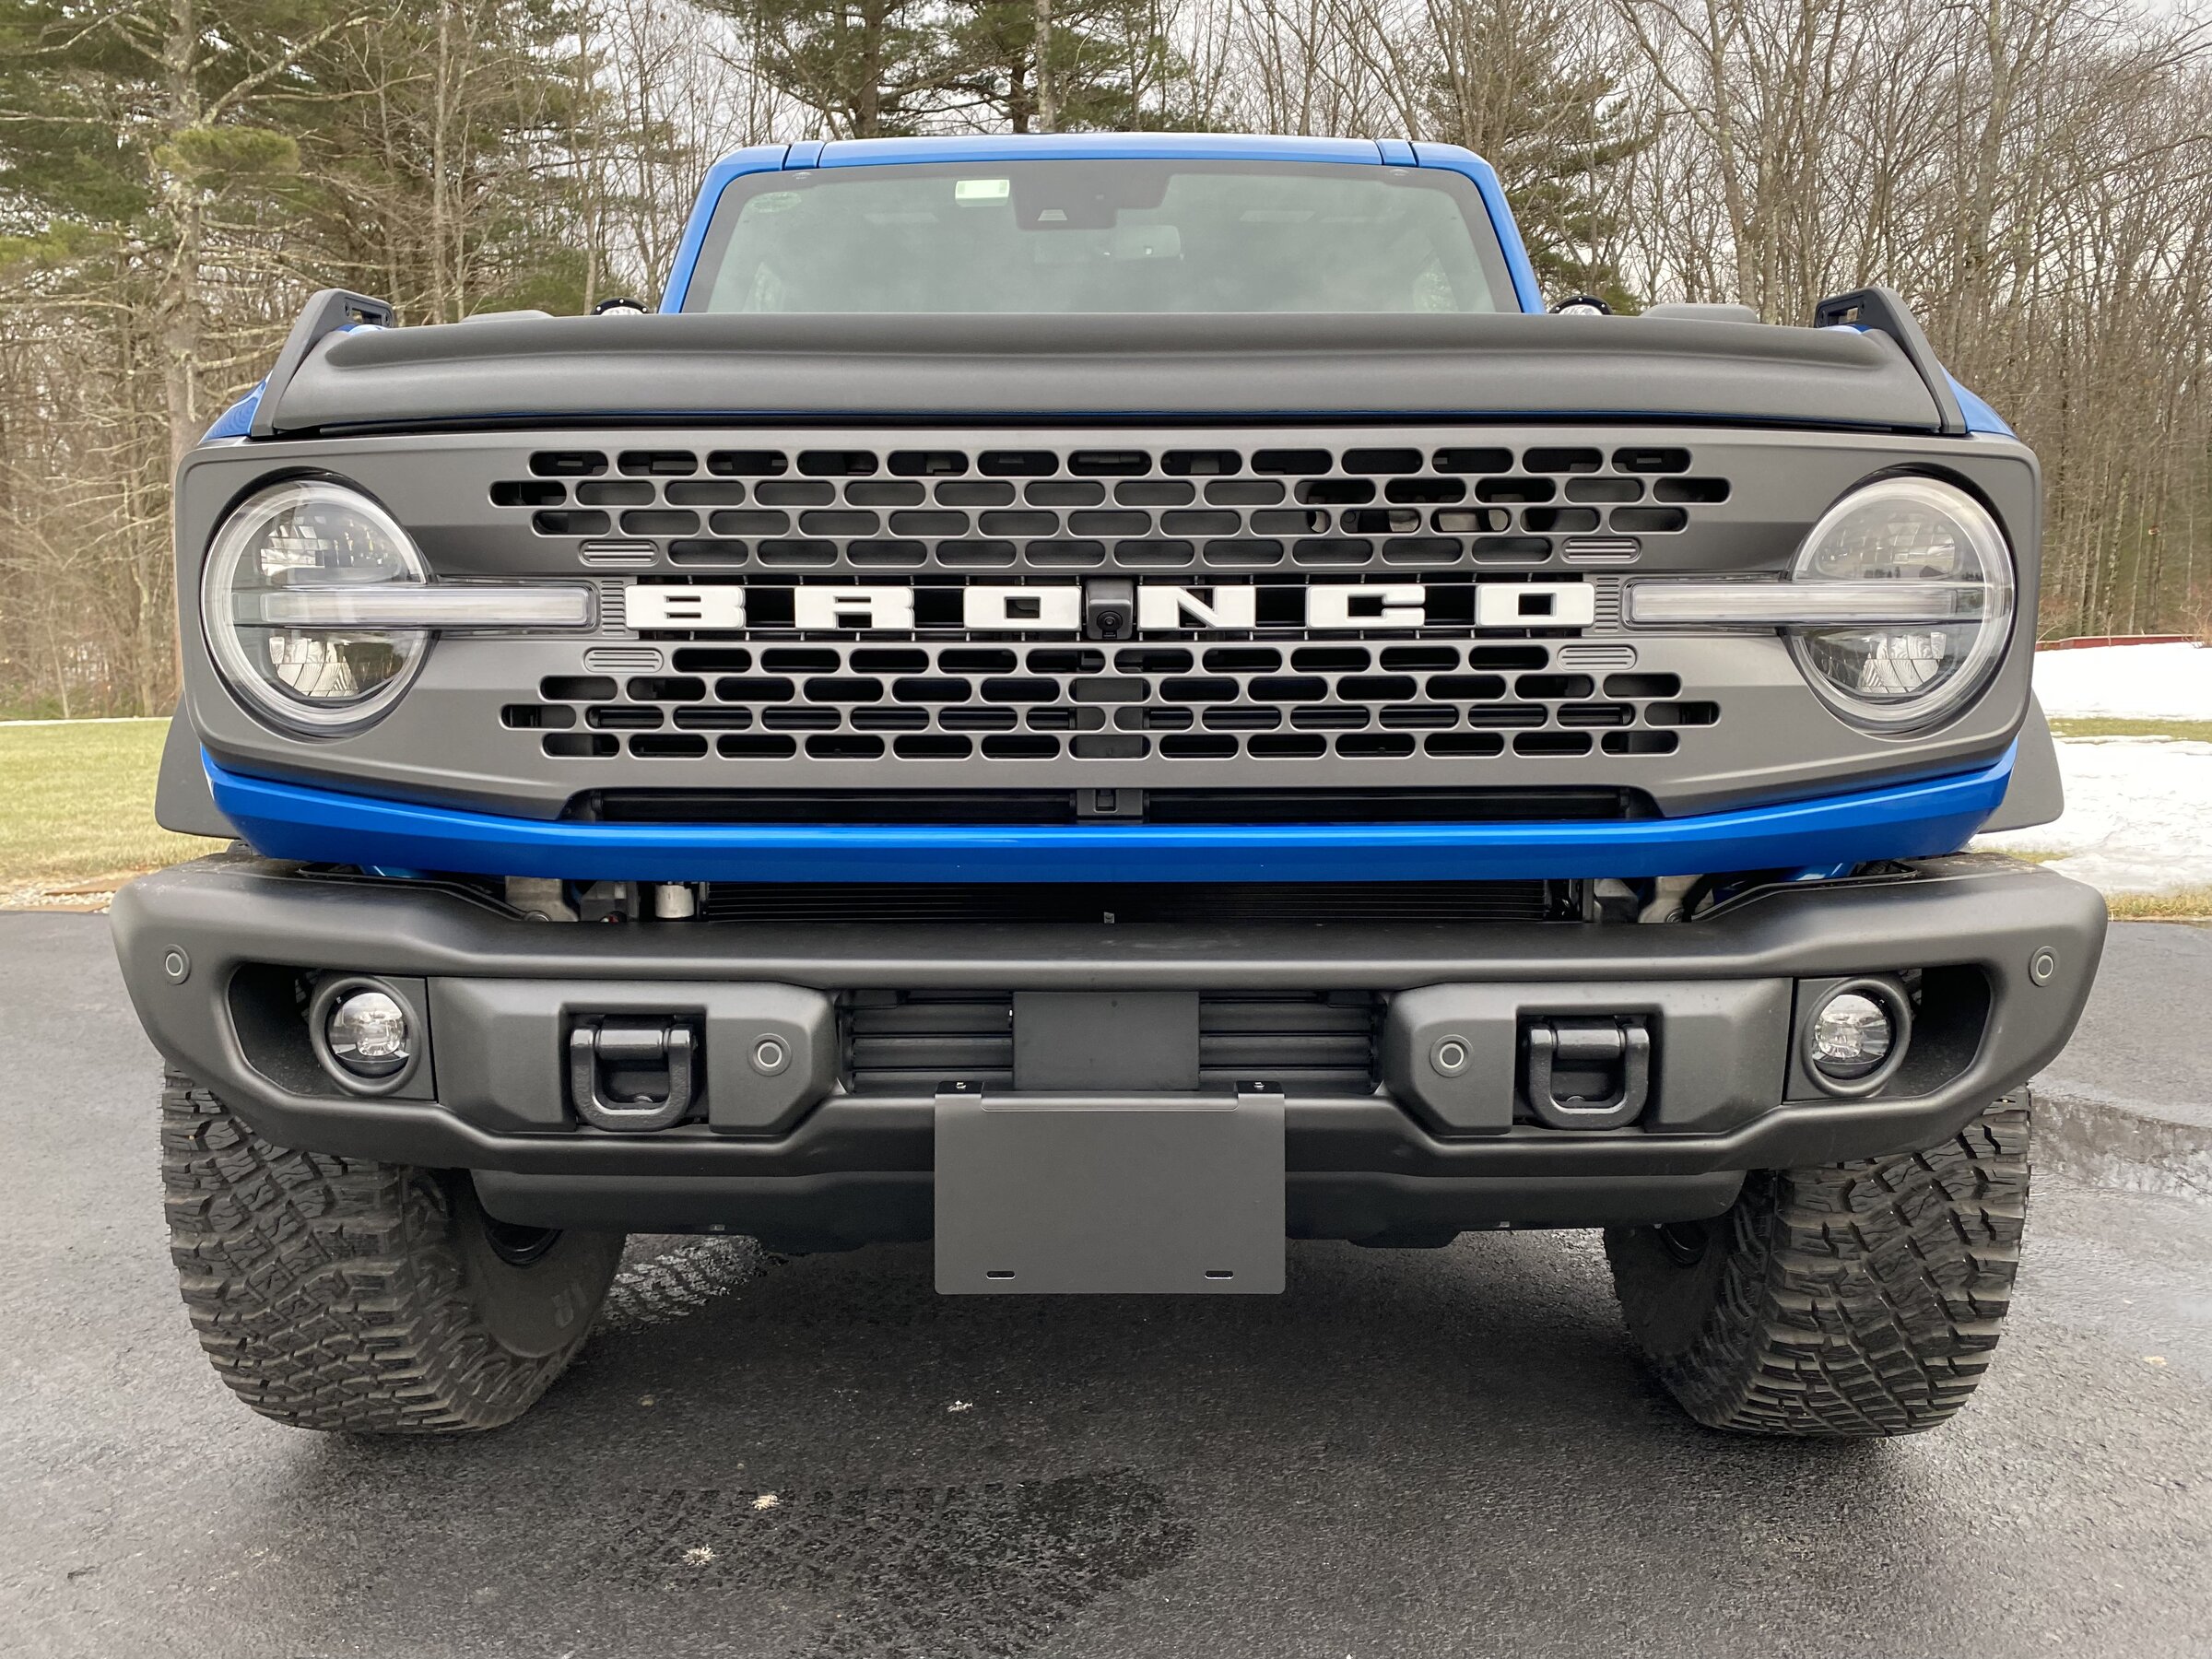 Ford Bronco PRICE DROP - Finally a Front License Plate bracket solution - order yours today 8E991016-5CED-457E-B25A-155AC058B0B9